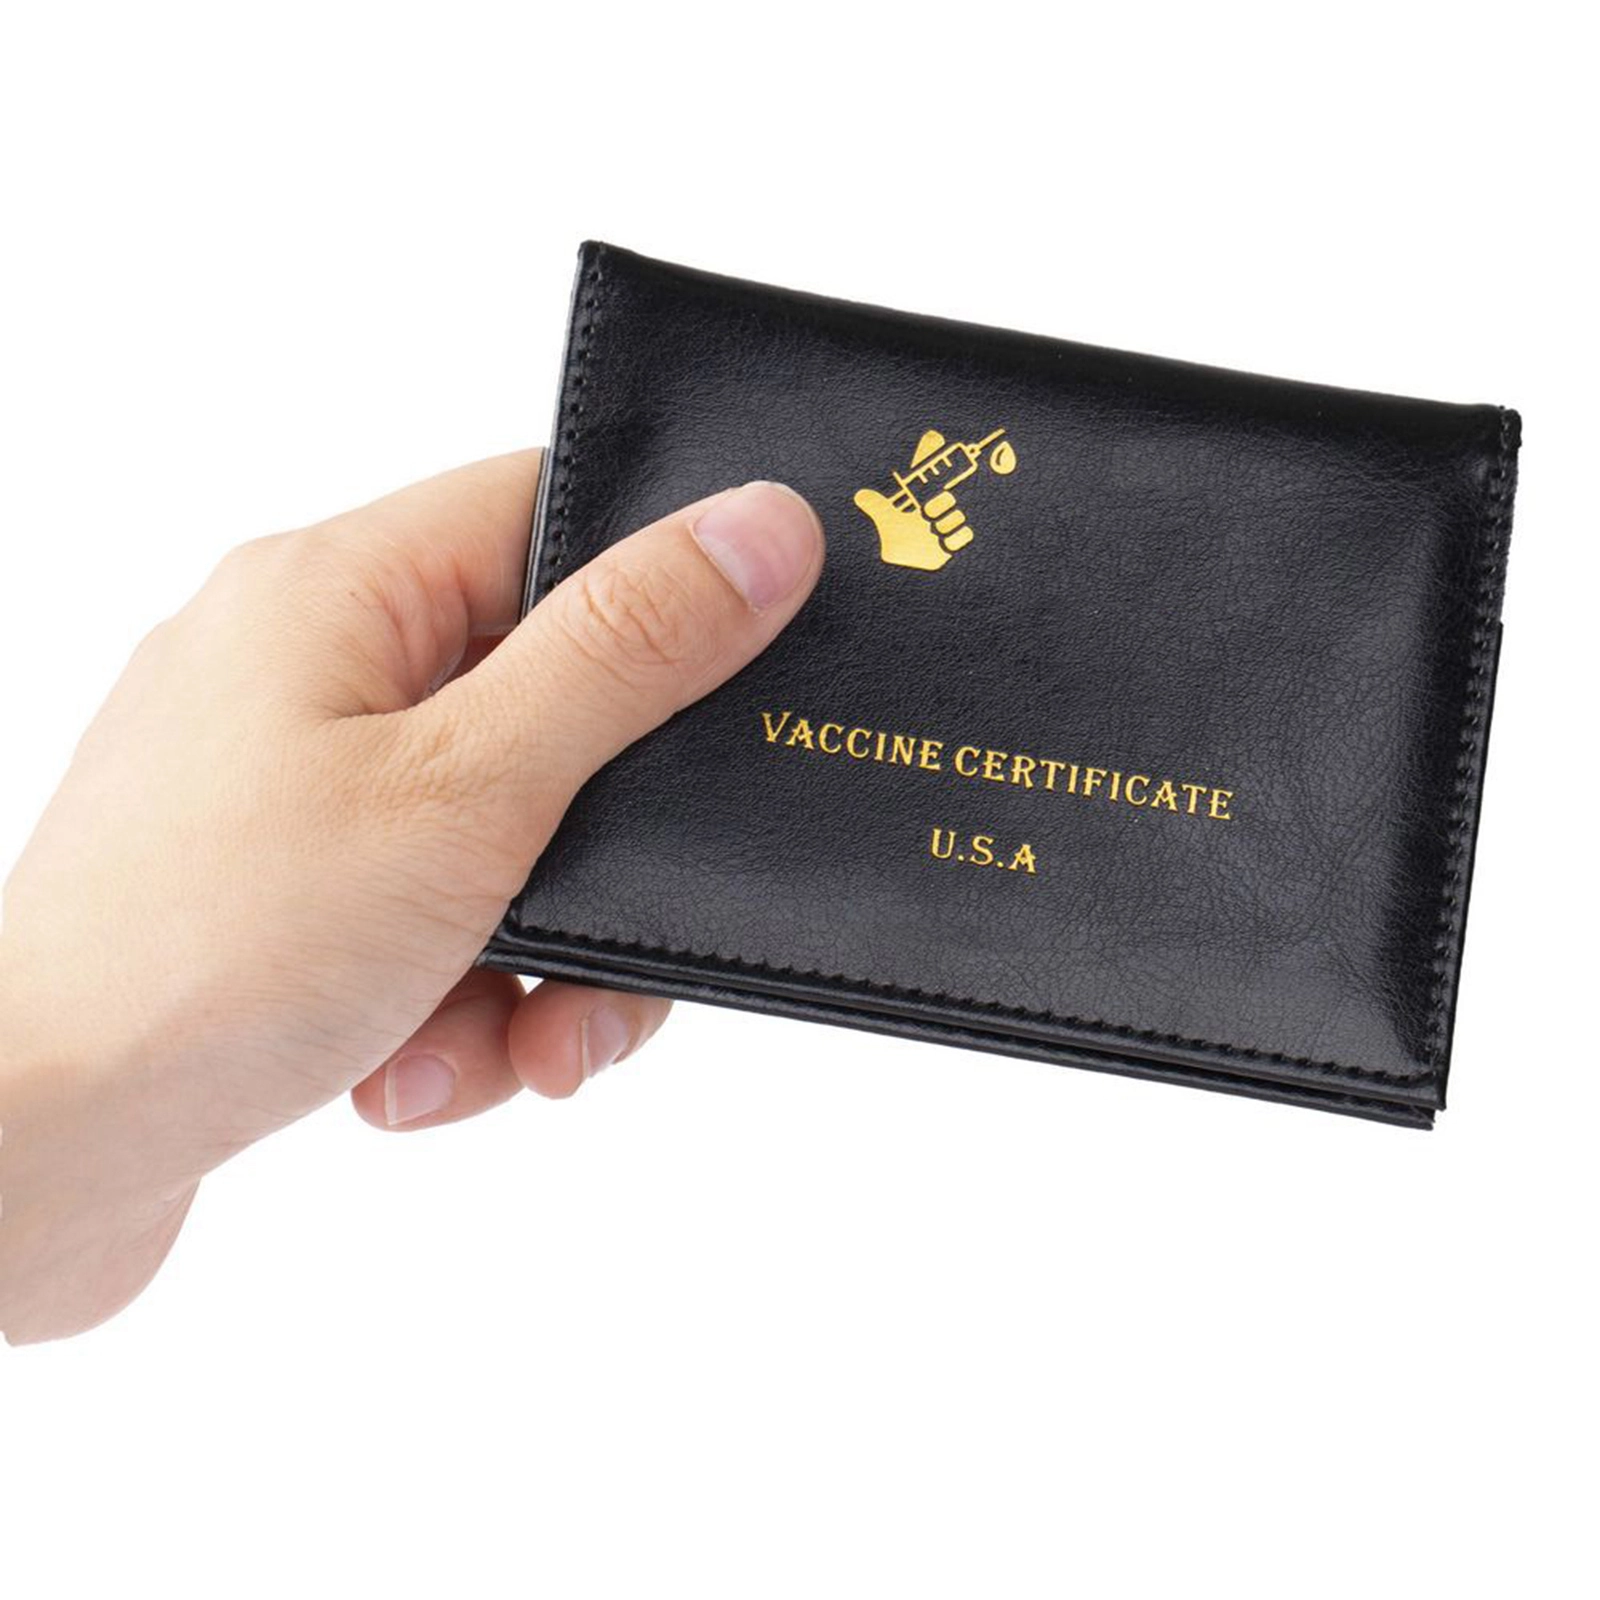 Multifunction Card Protector Registration Insurance Driving Documents Credit Cards PU Leather Holder Cover 3